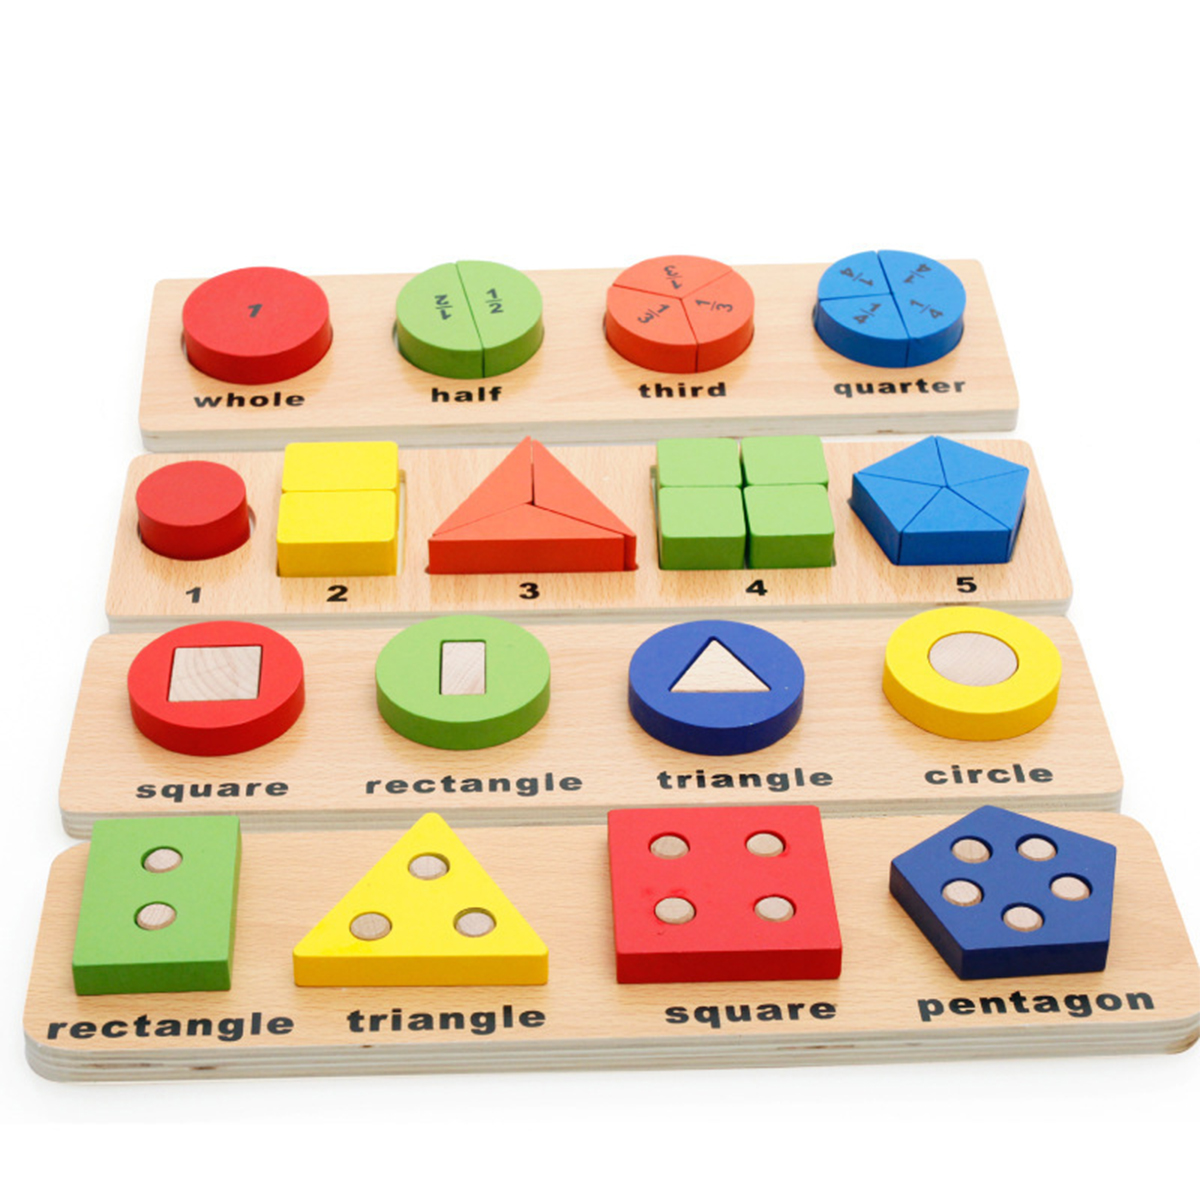 

Wooden Geometric Matching Blocks Kids Baby Educational Toys Inlay Building Block Teaching Aid Toy Gift